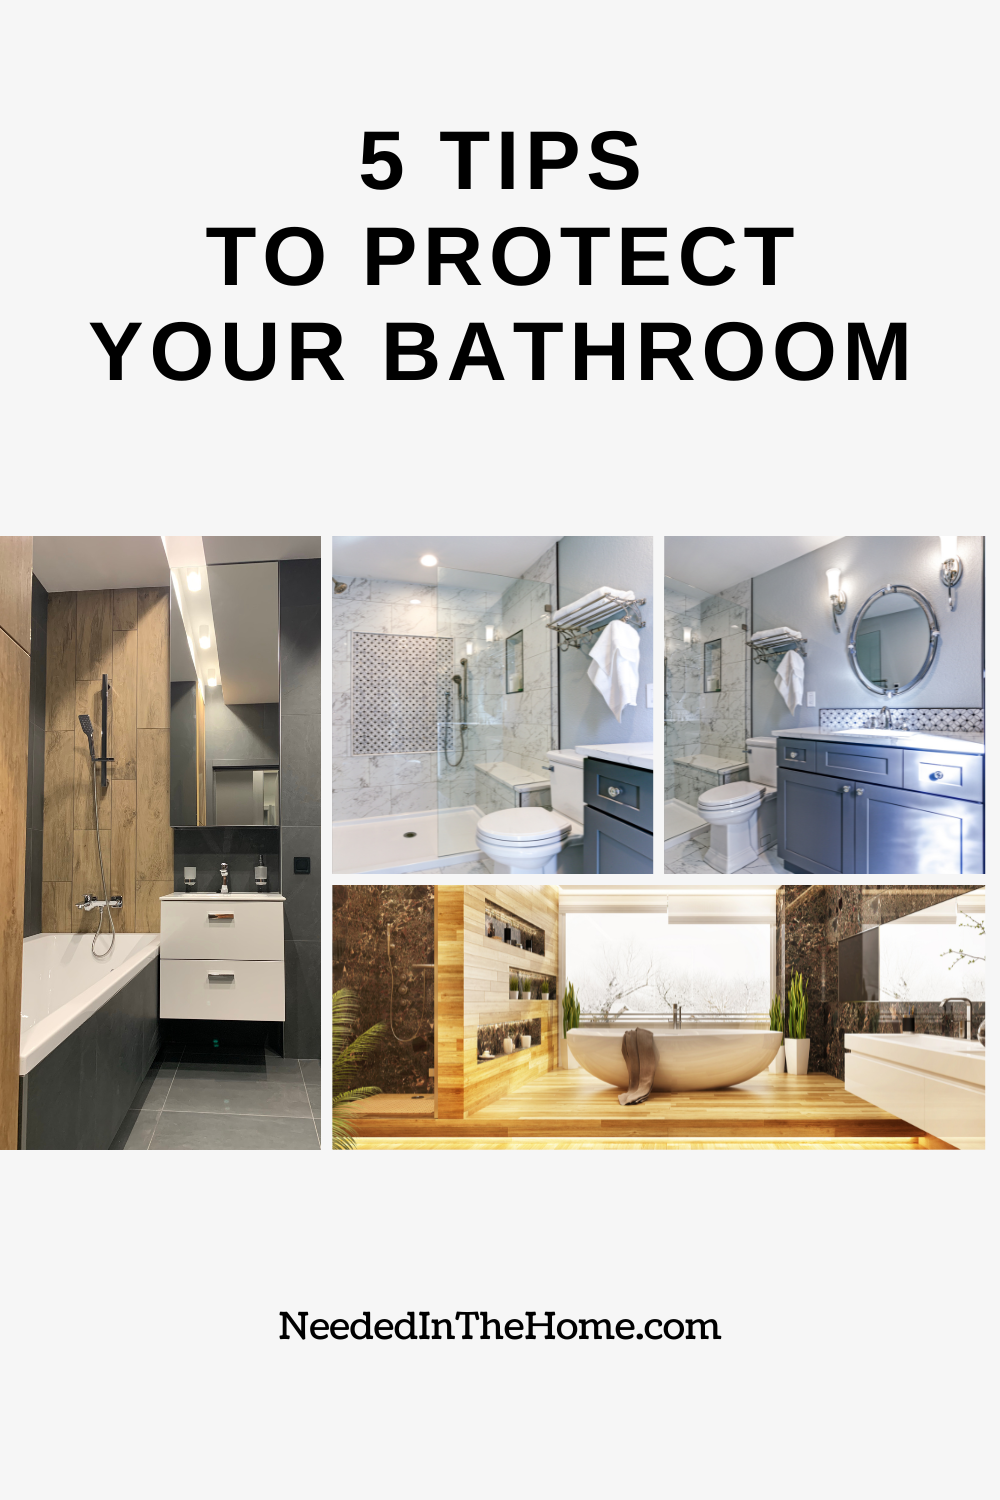 pinterest-pin-description 5 tips to protect your bathroom bathtub toilet sink faucet neededinthehome